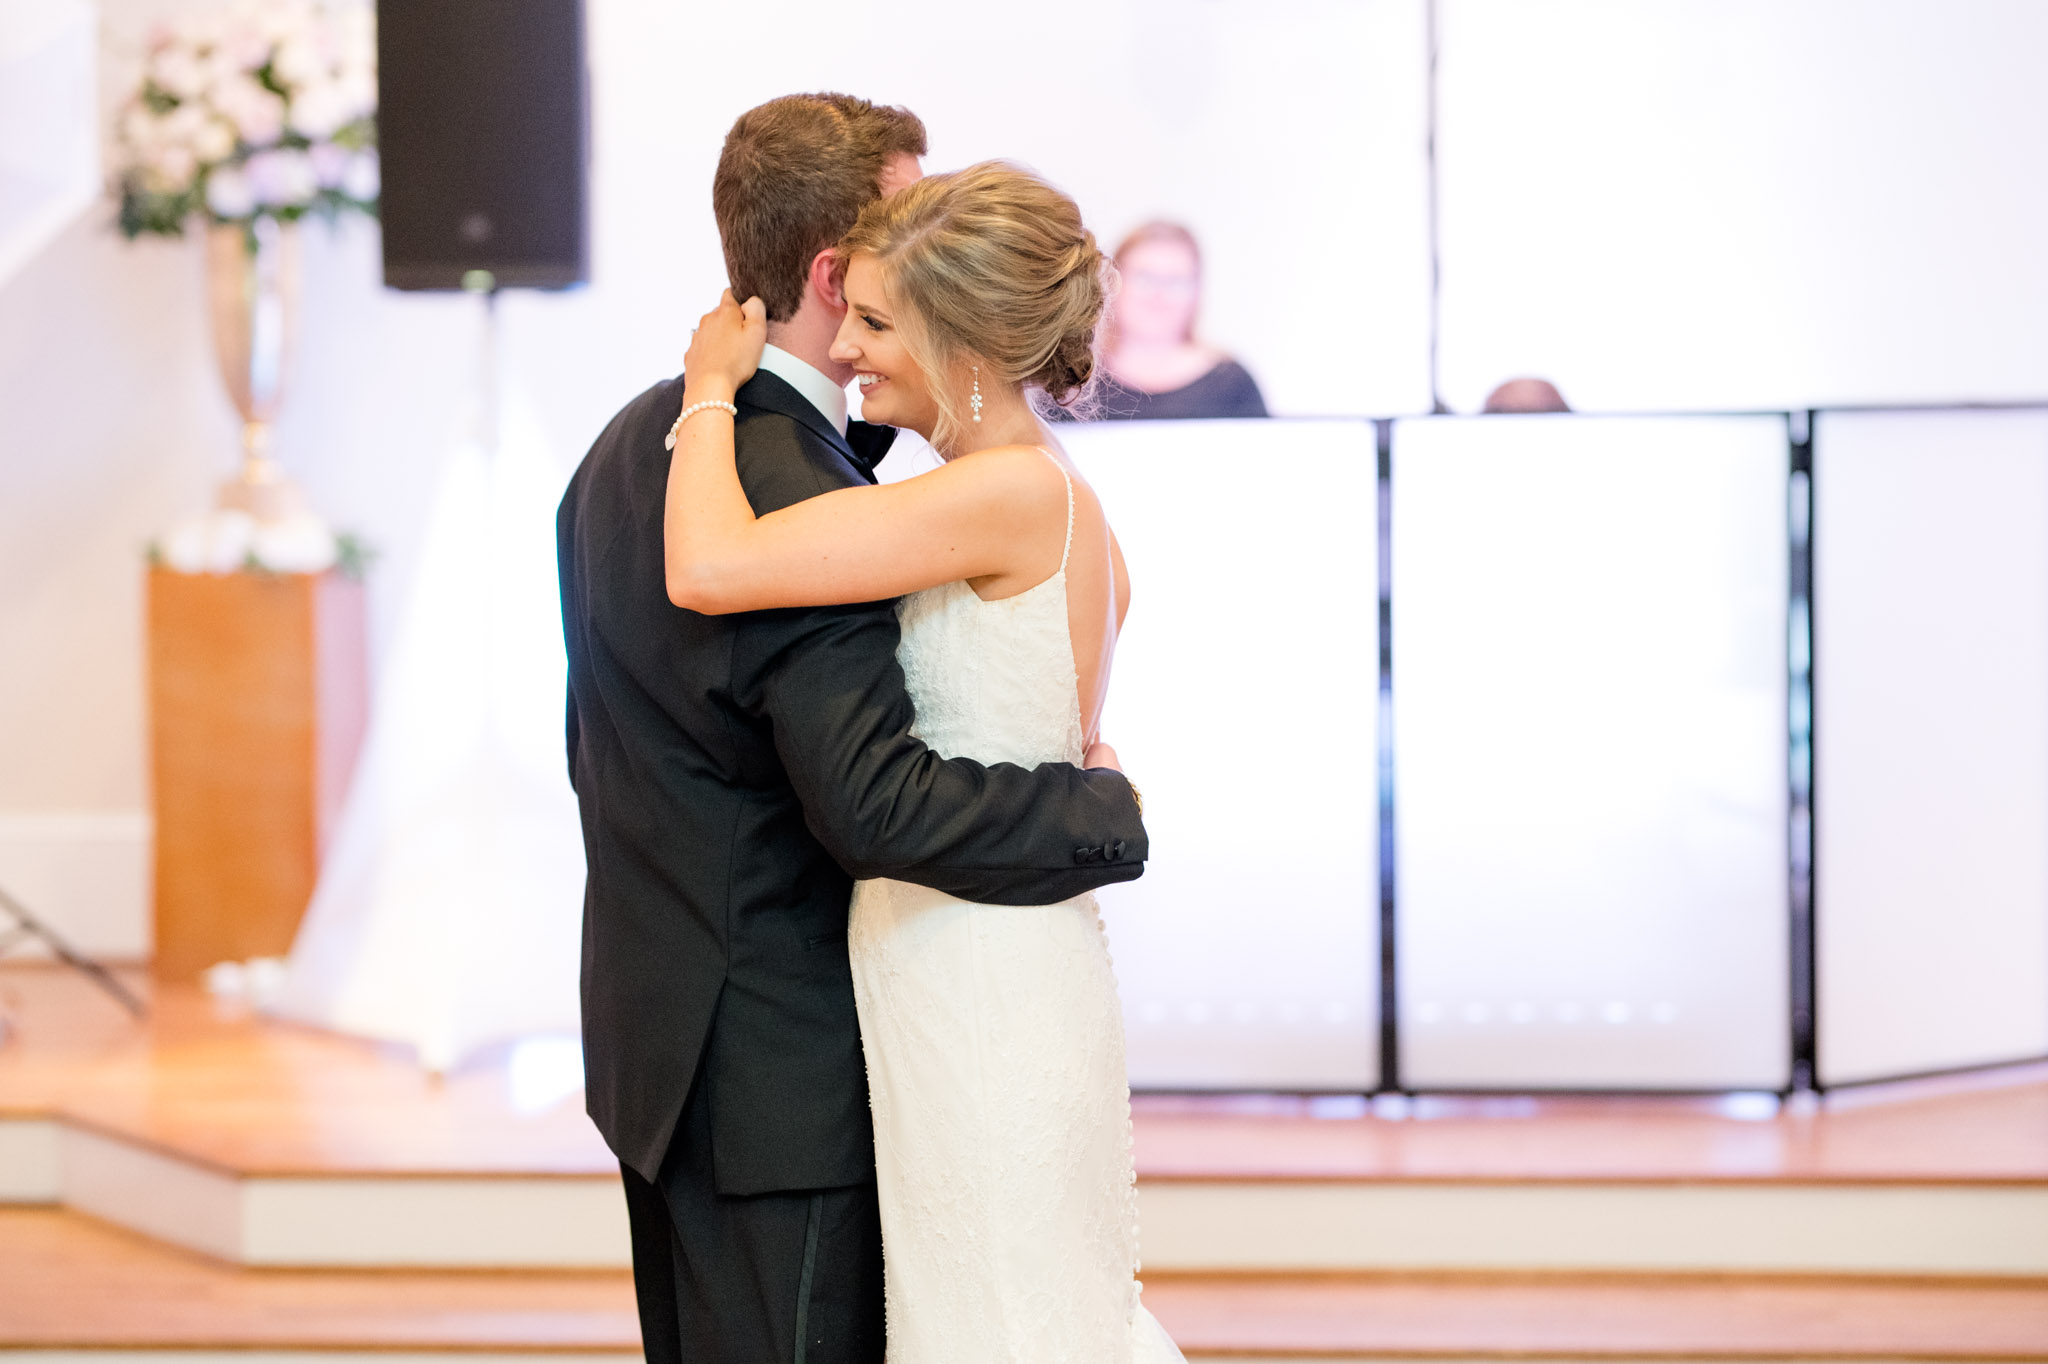 Bride smiles while dancing with groom.